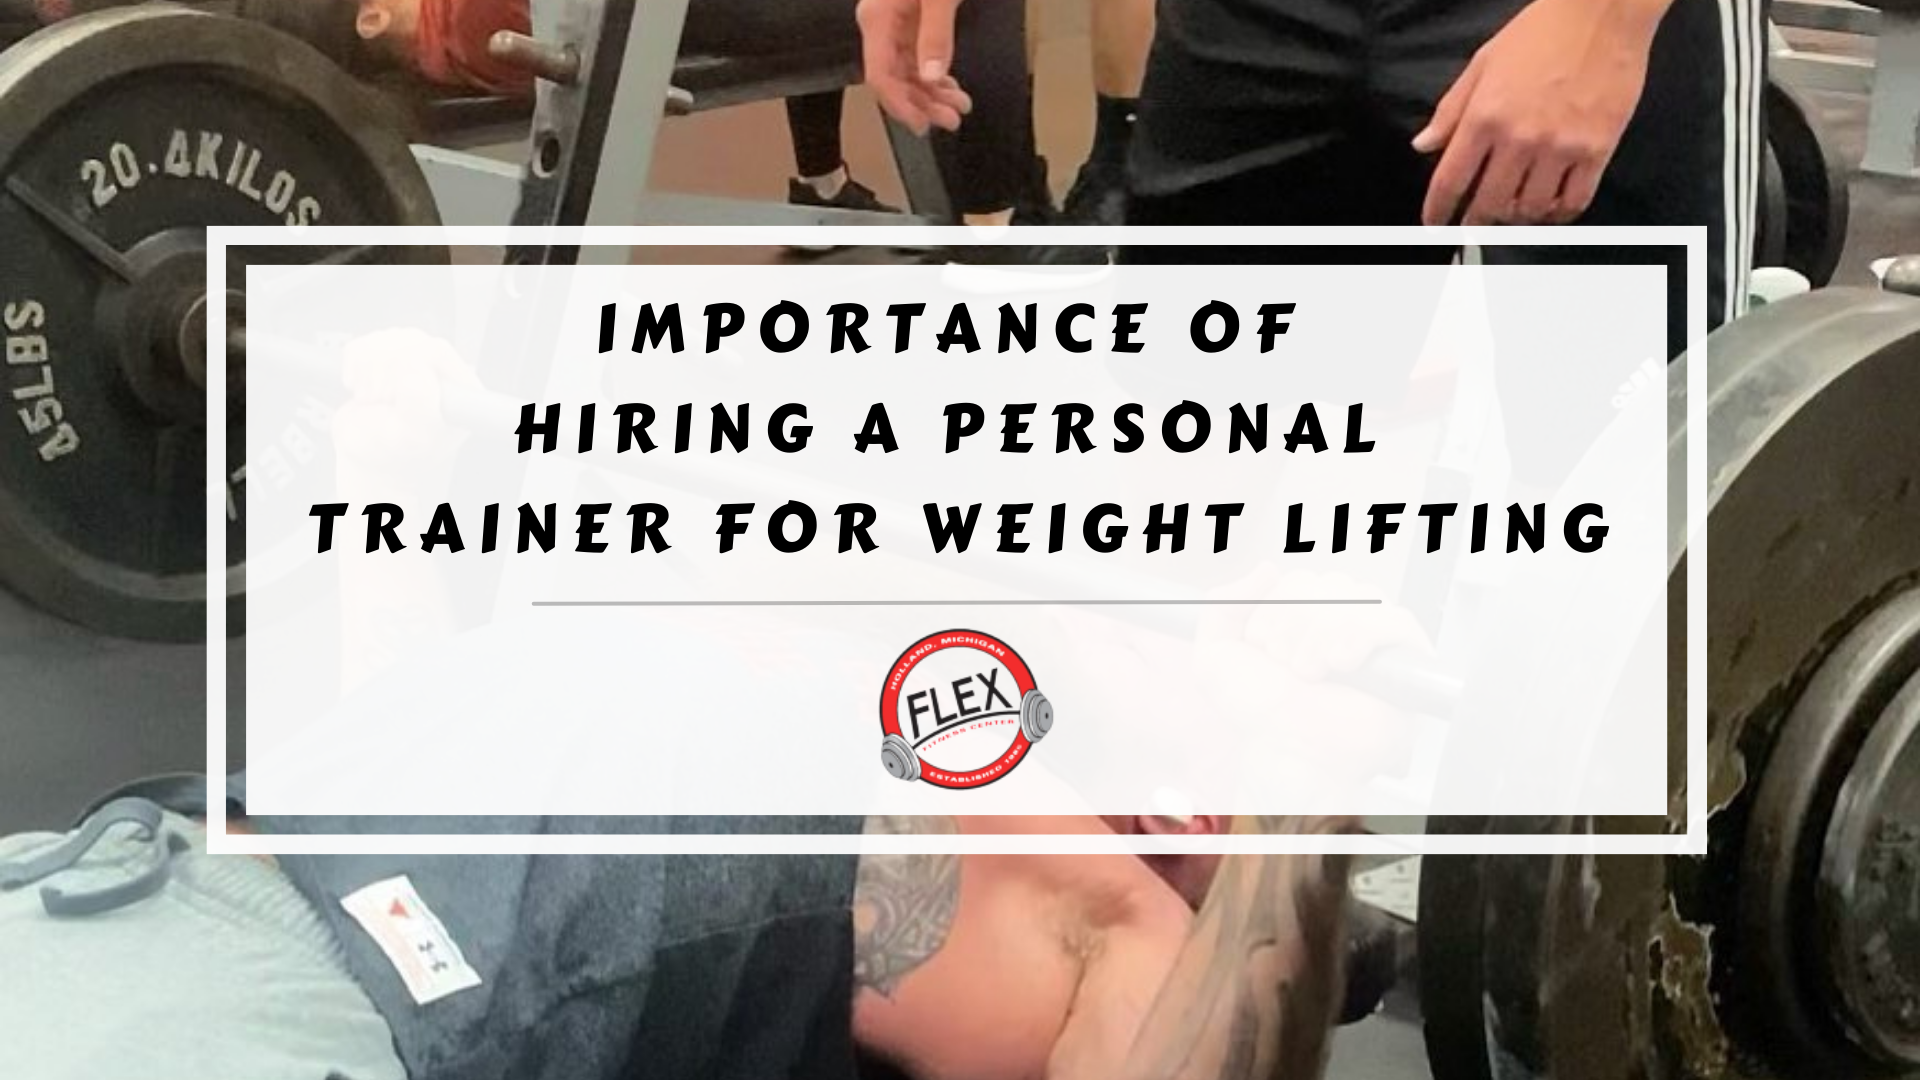 Featured image of importance of hiring a personal trainer for weight lifting